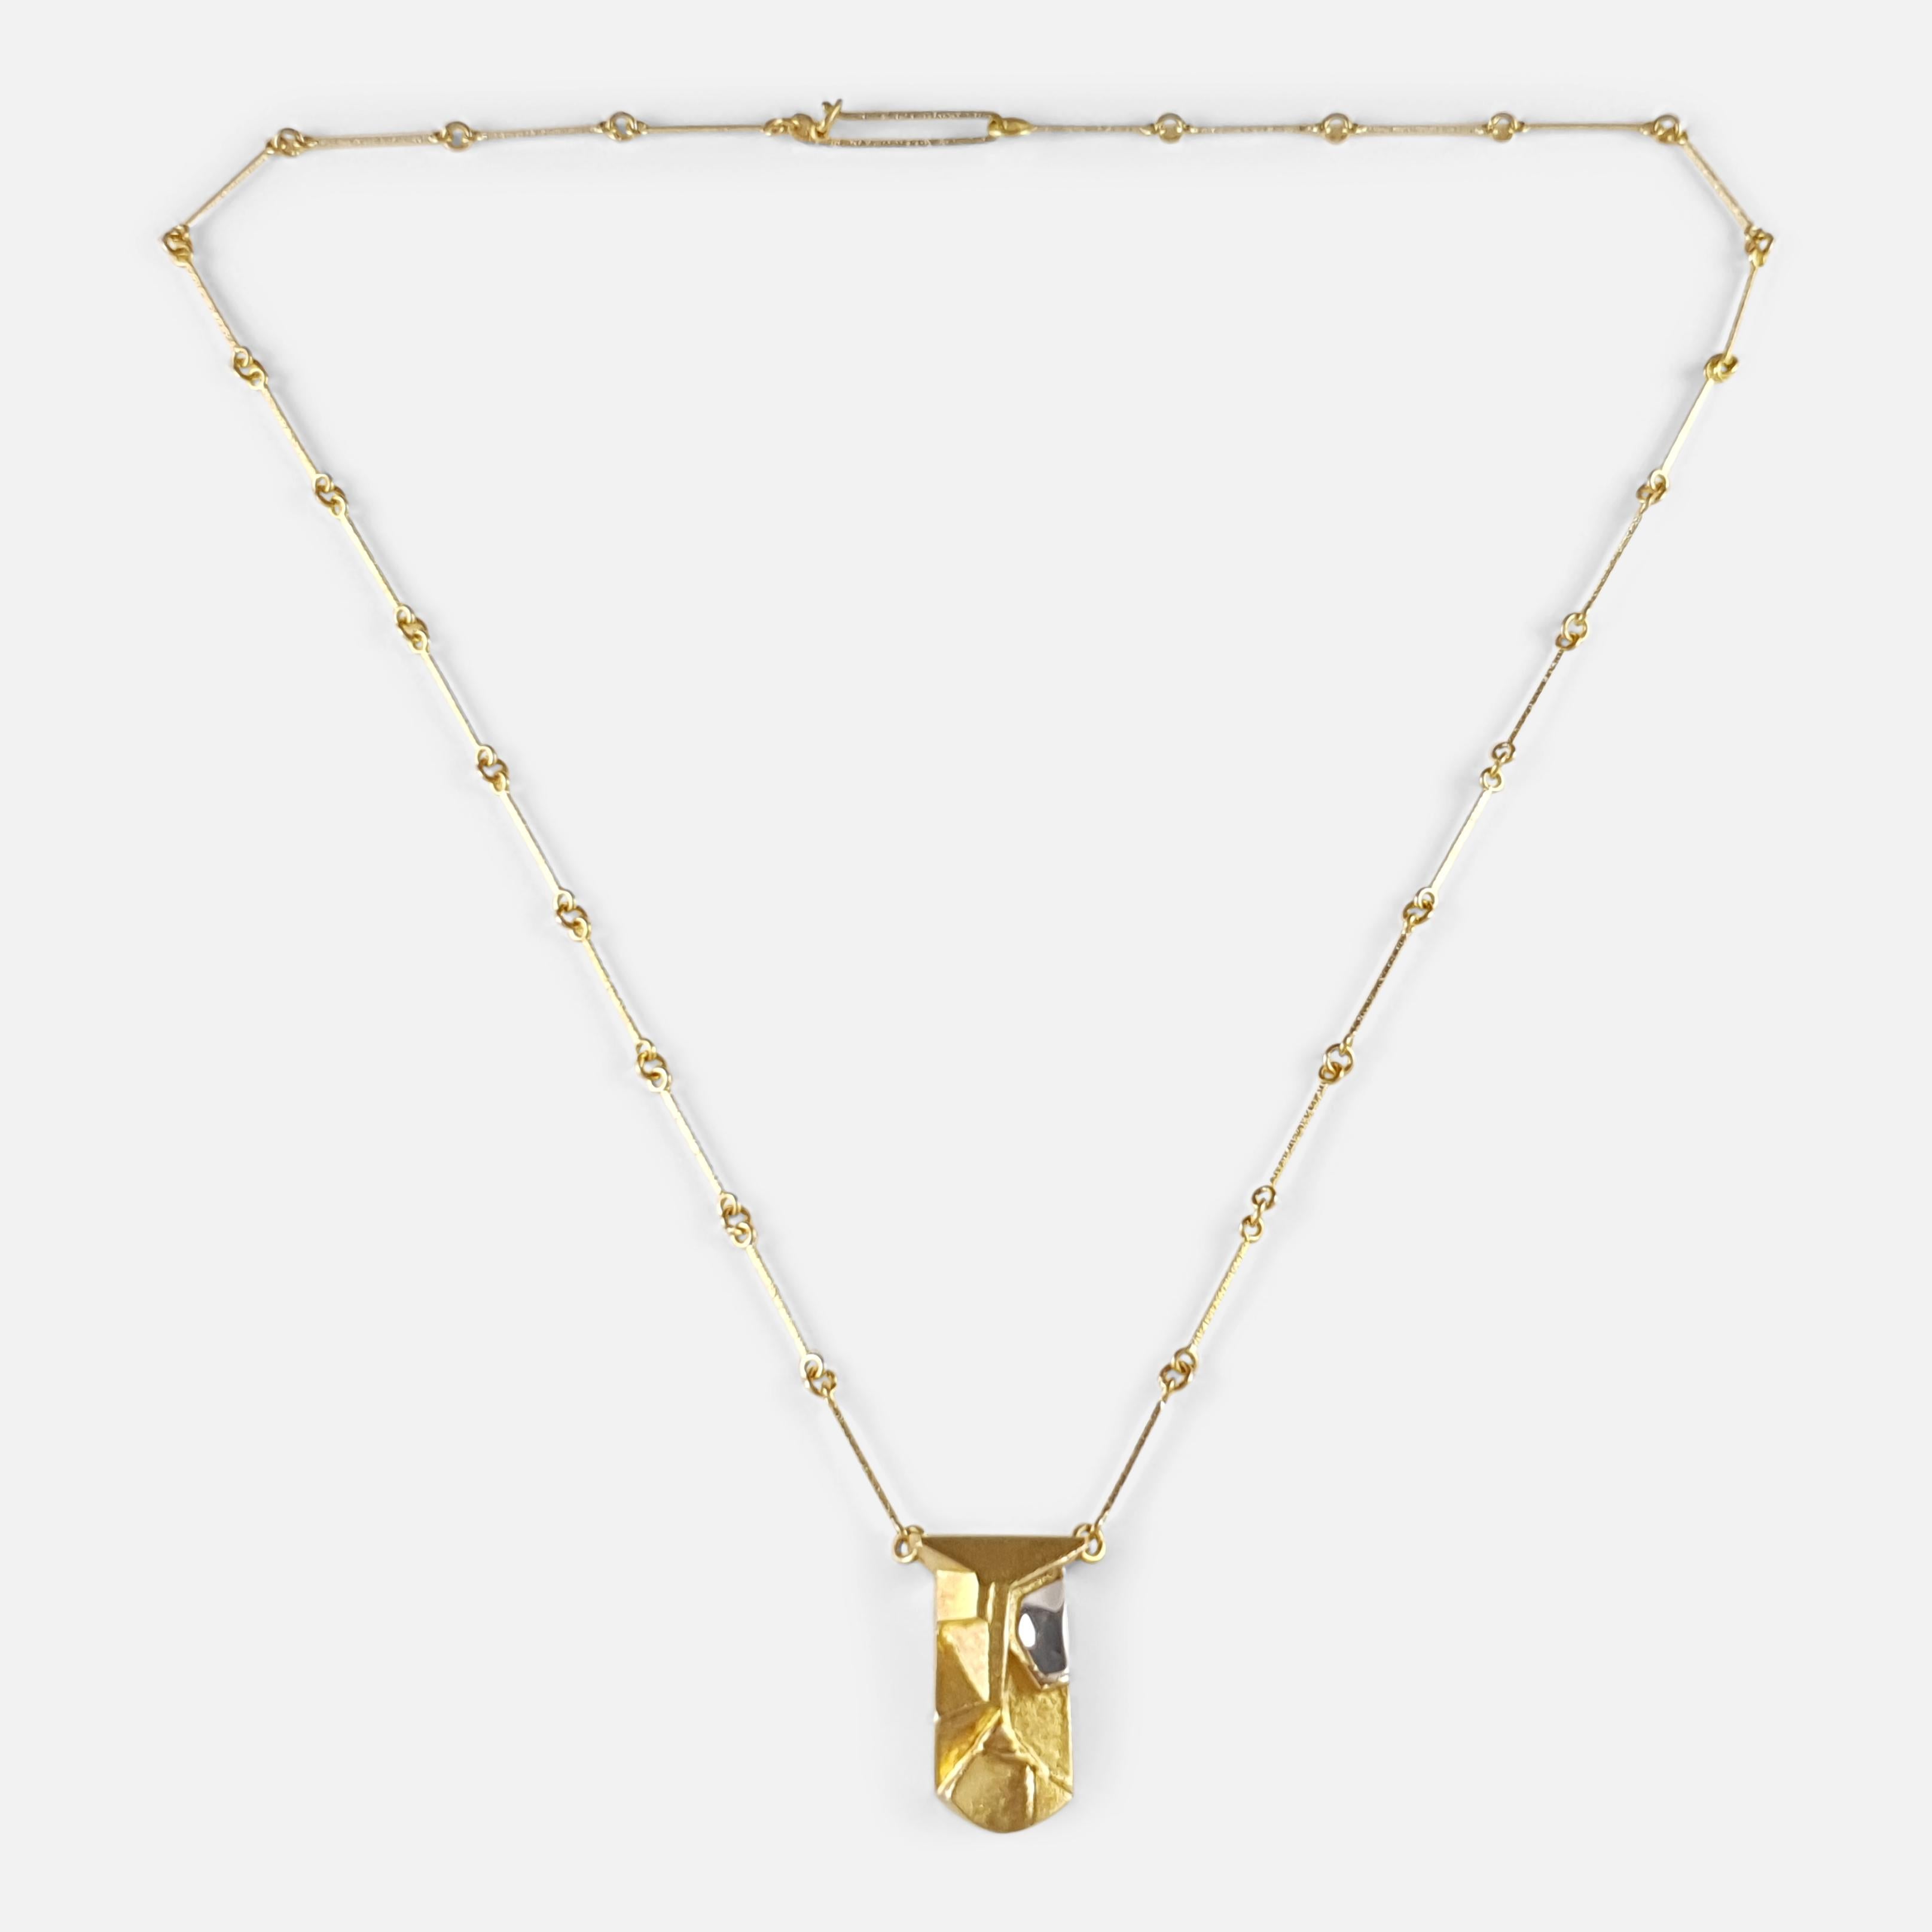 A Finnish 14ct yellow and white gold pendant necklace by Lapponia.

The necklace is hallmarked with the Lapponia makers mark, common control mark '585' to denote 14 carat gold, Finnish nation mark, and date code 'F9' for 2007.

Period: - Early 21st